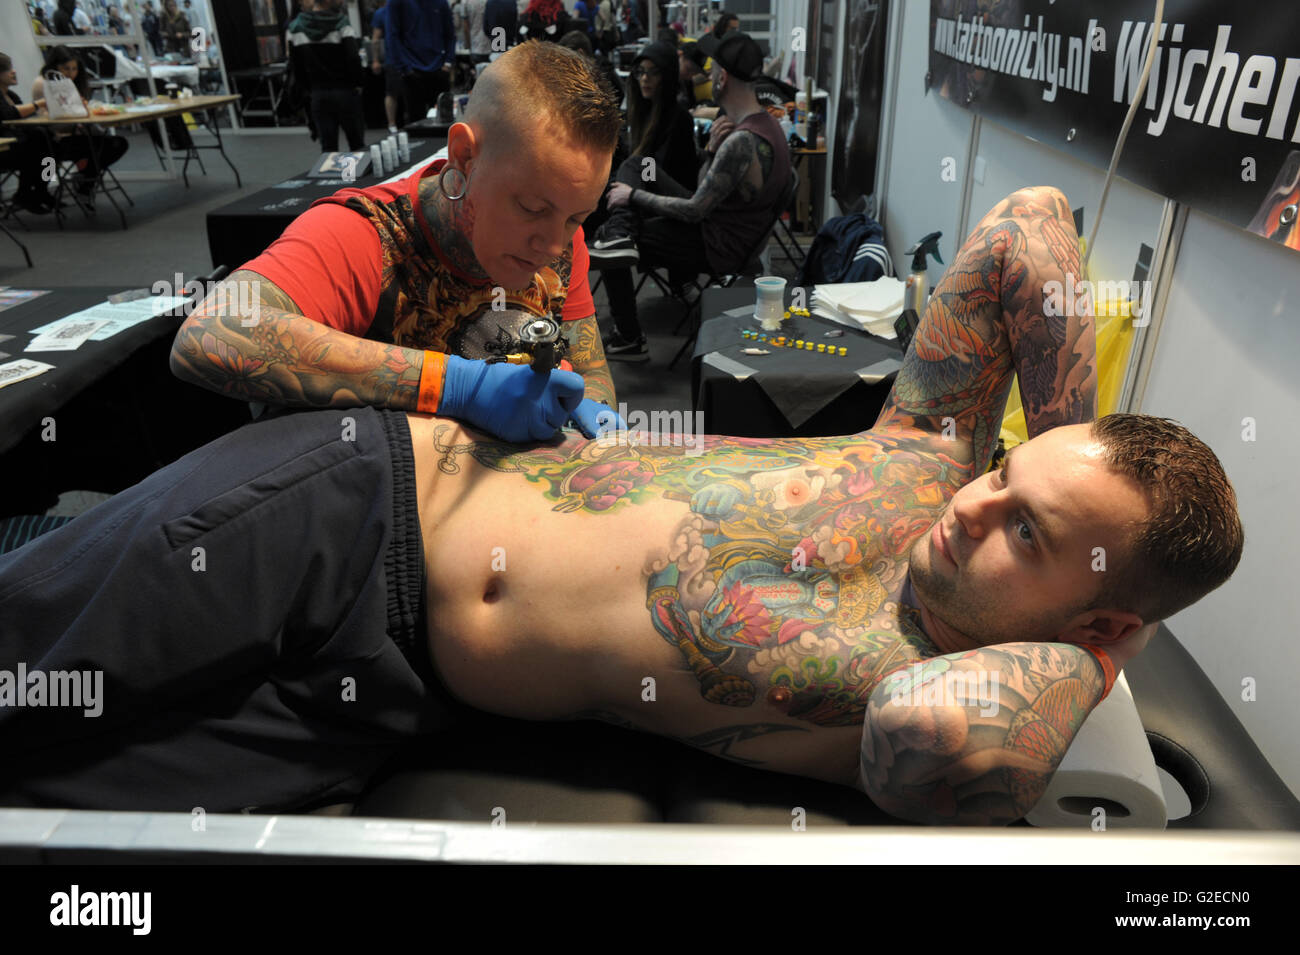 London, UK. 29th May, 2016. Nicky from Wijchen, Holland, second place winner in Best Oriental category at the Great British Tattoo Show held at Alexandra Palace here 29th May 2016. HUGH ALEXANDER/Alamy Live News Stock Photo